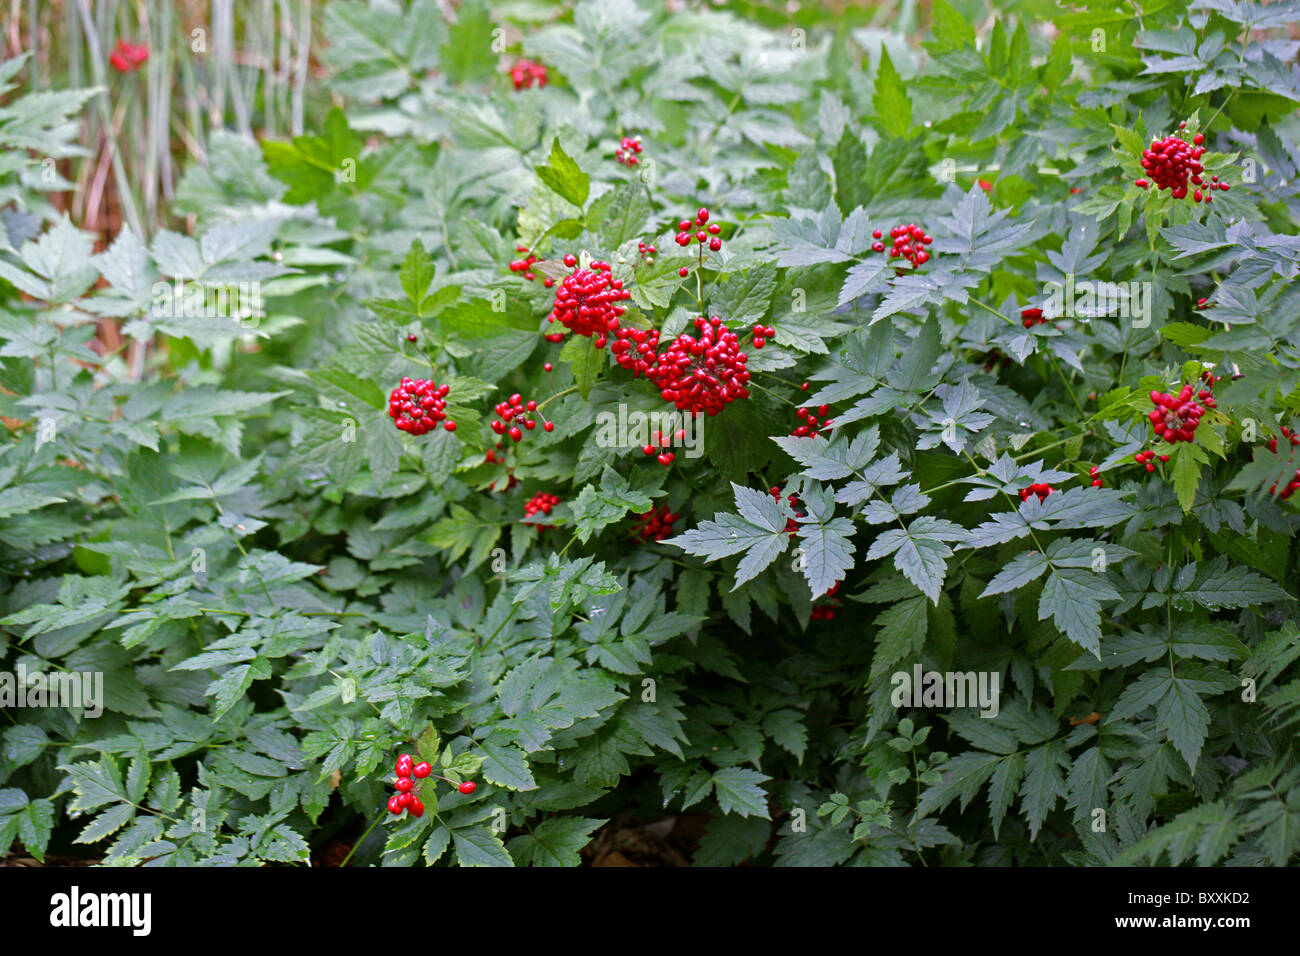 Red Baneberry, Chinaberry o bambola's Eye, Actaea rubra, Ranunculaceae. America del nord. Foto Stock